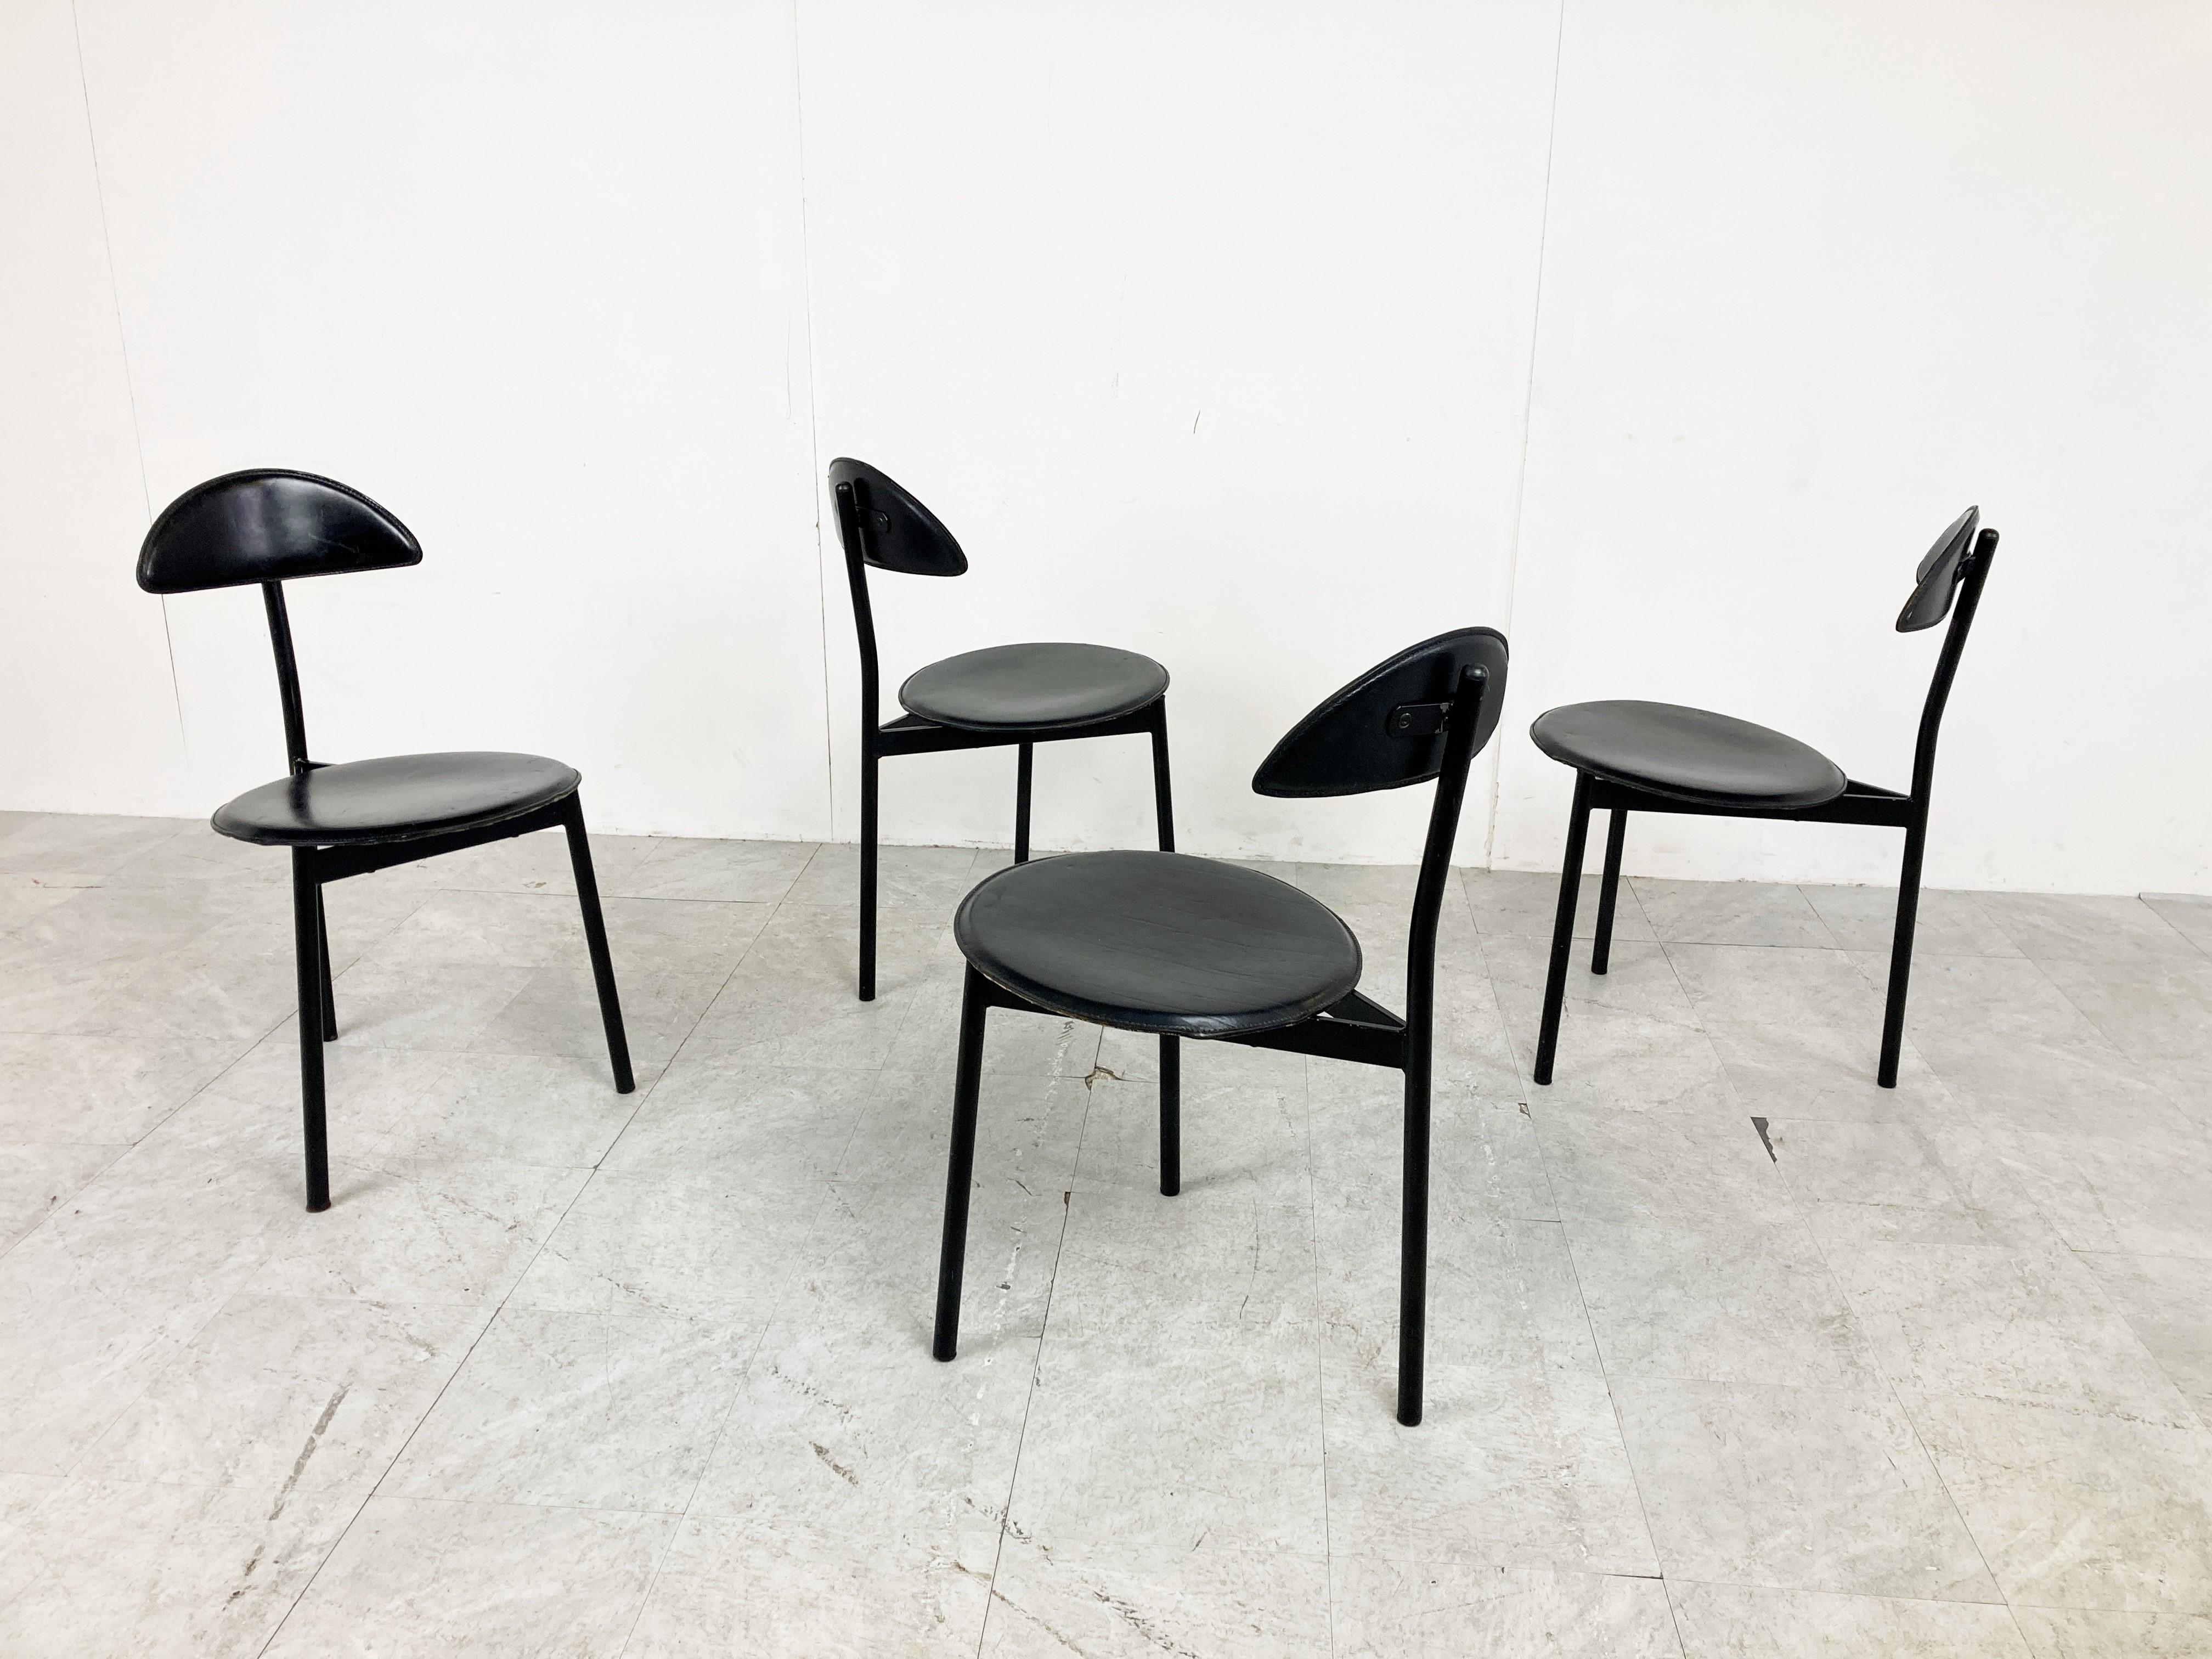 Set of 4 Post Modern Dining Chairs by Linea Veam, 1980s For Sale 1